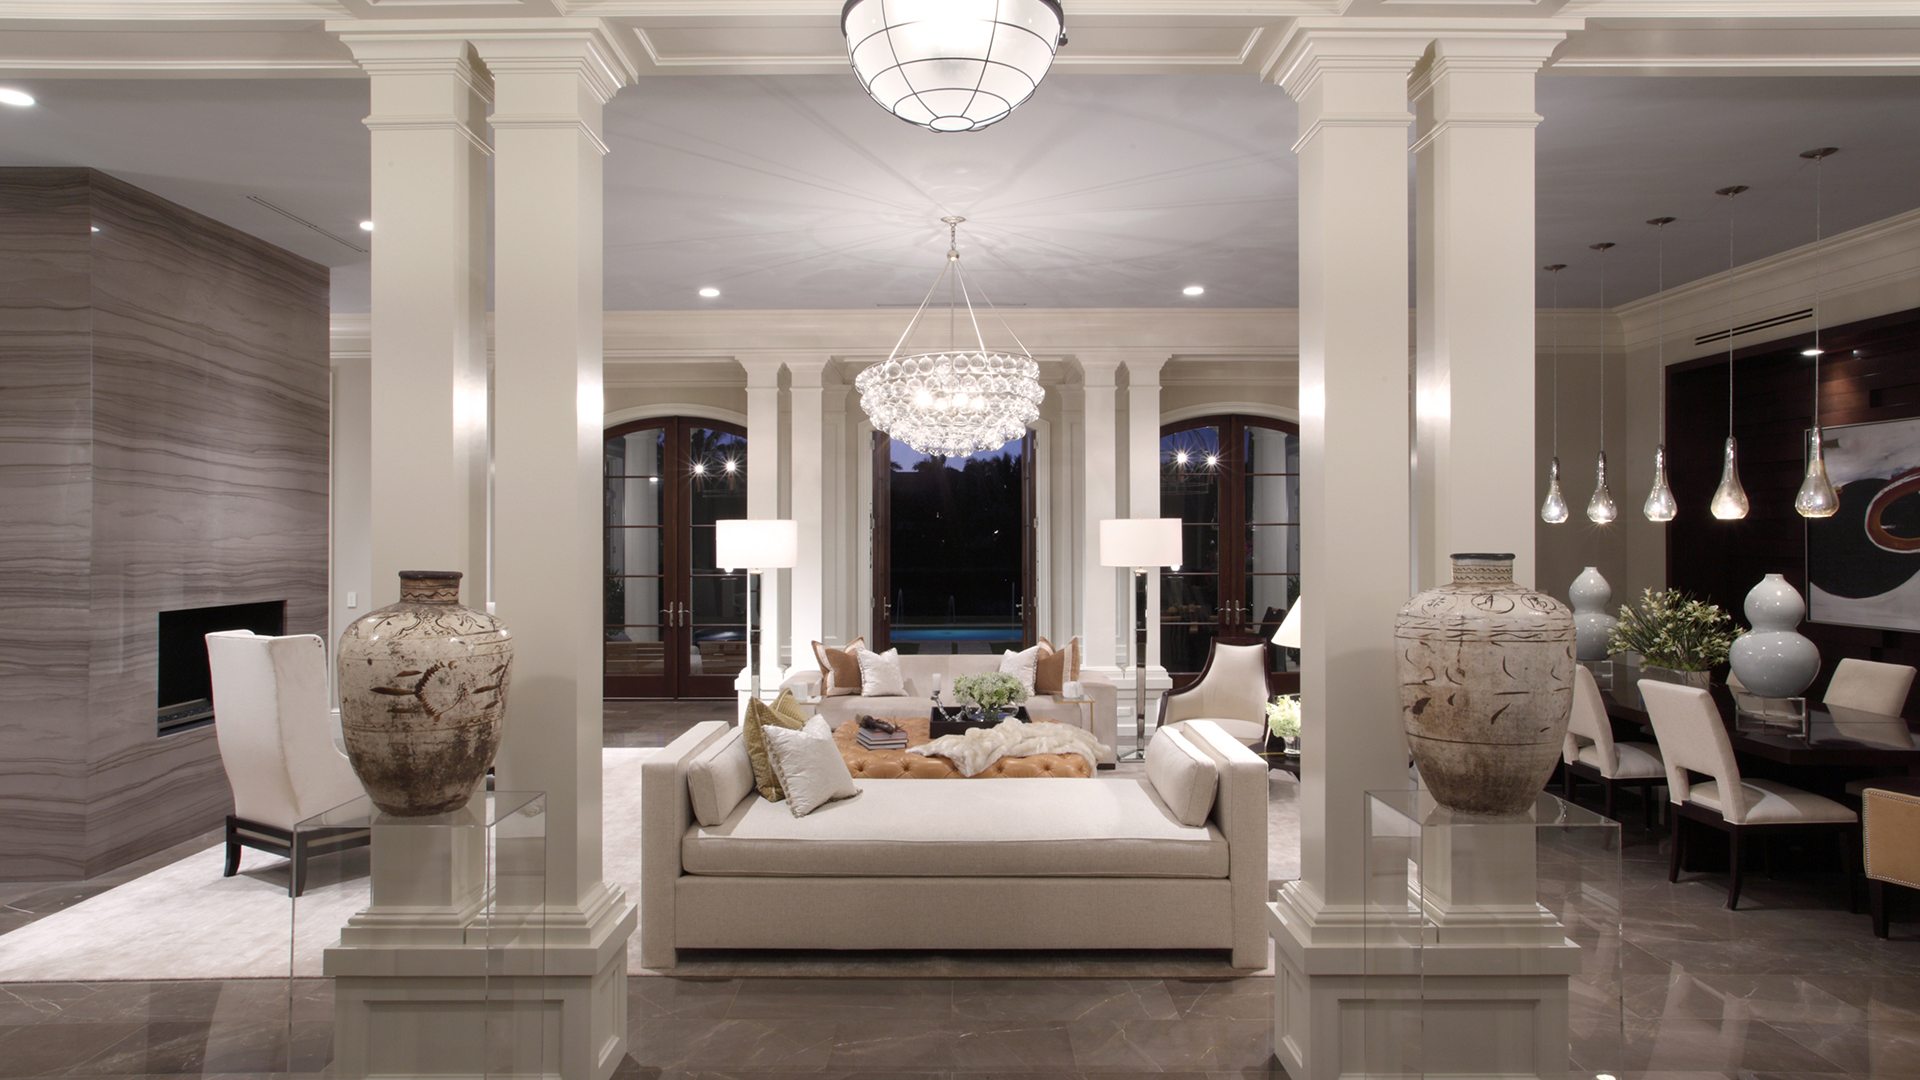 Marc-Michaels Sophisticated Transitional Design Feature Living Space